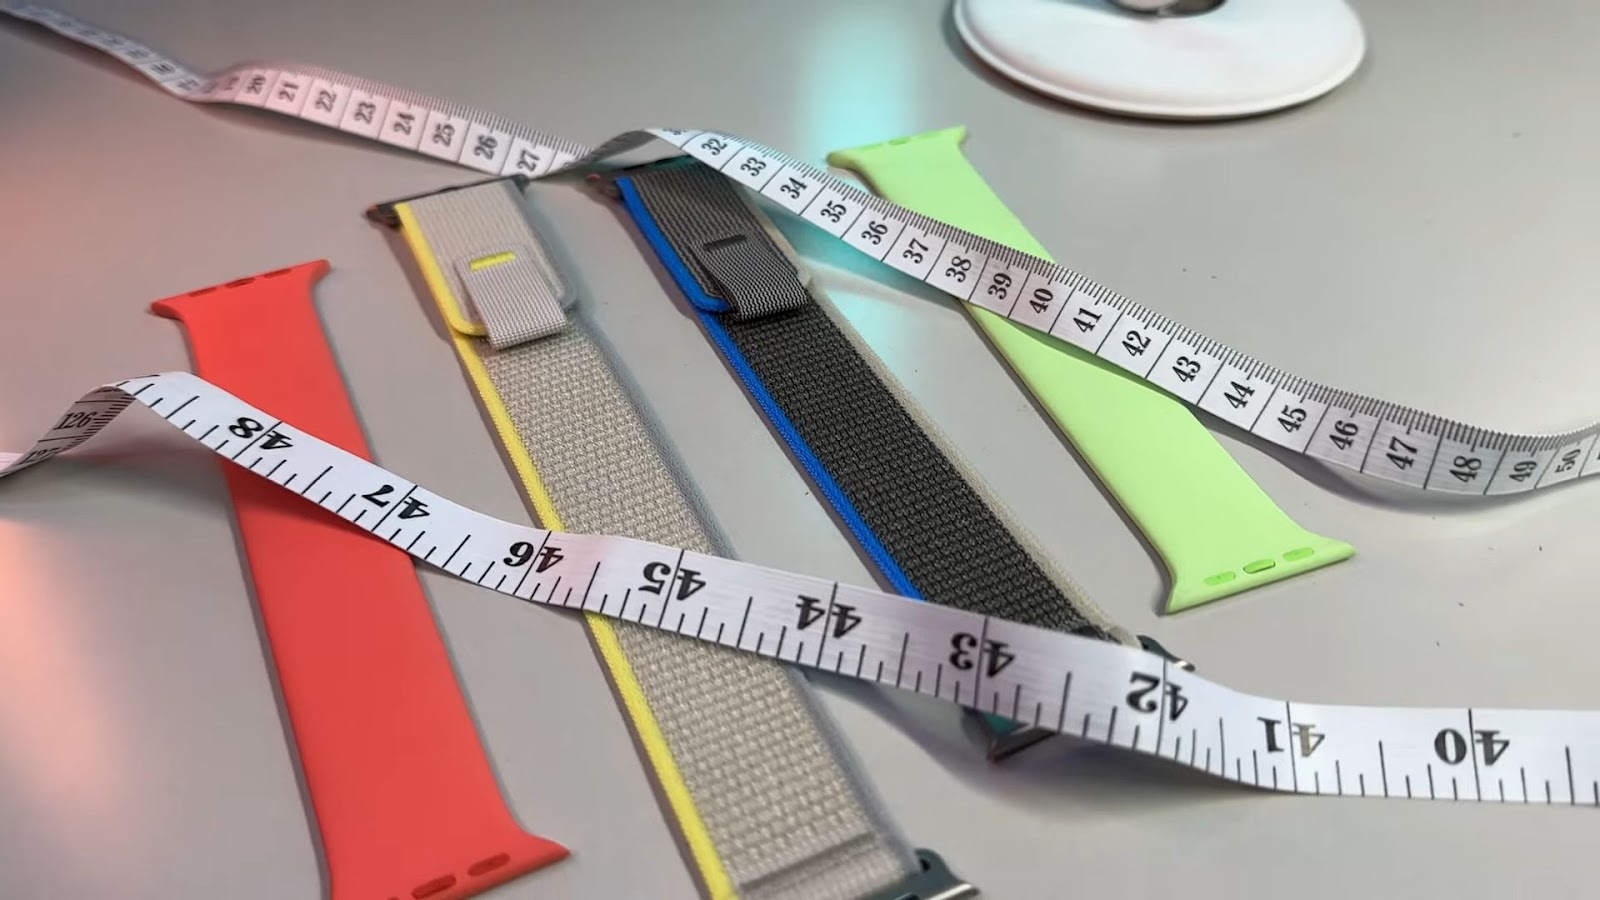 Measuring Wrist With Tape Measure - Apple Watch Size